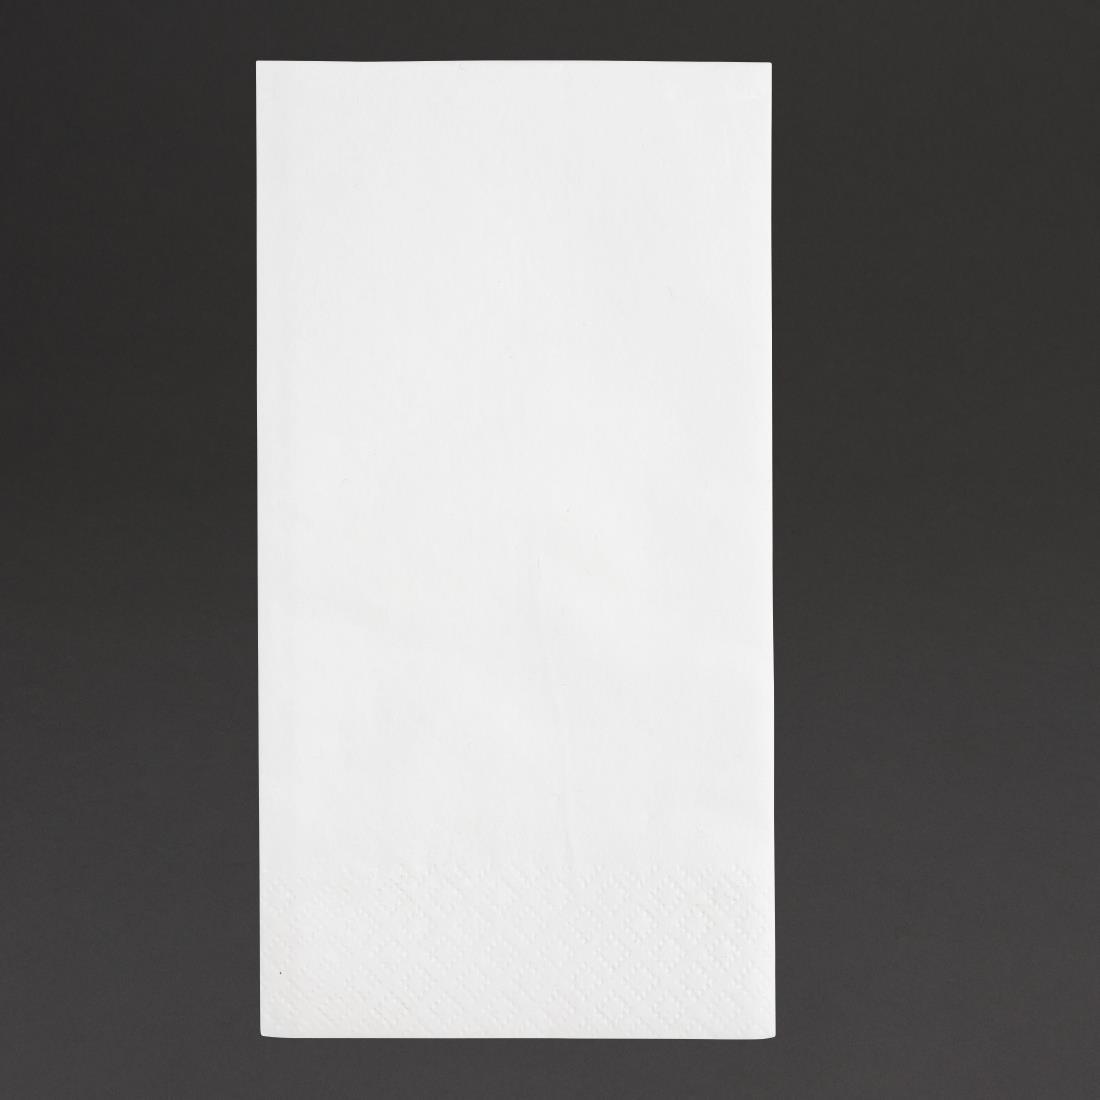 Fiesta Recyclable Lunch Napkin White 33x33cm 2ply 1/8 Fold (Pack of 2000) - FE227  - 1